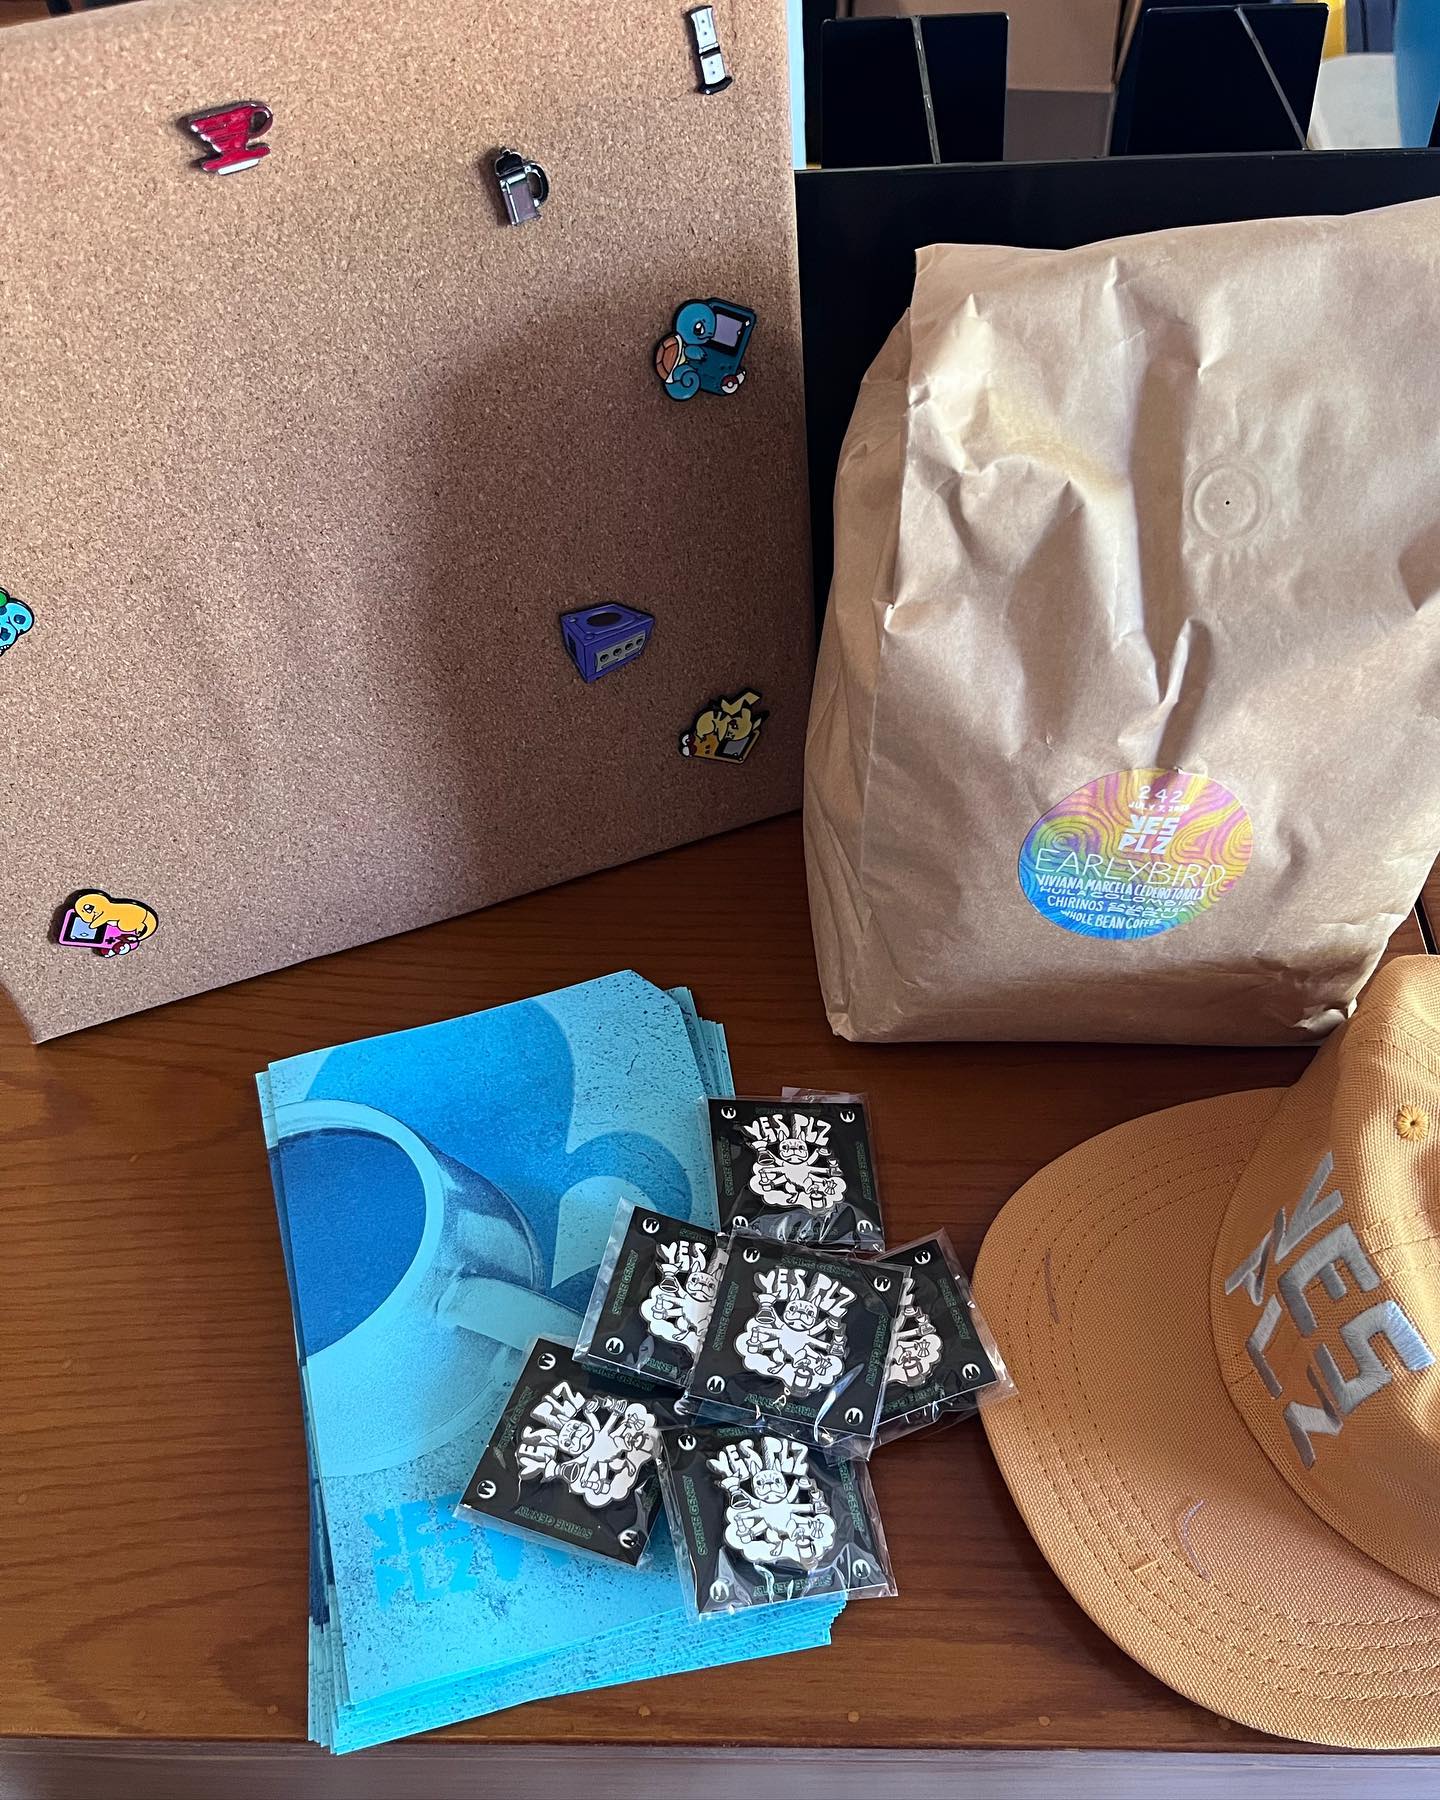 I just opened our first shipment from @yesplzdotcoffee and I about cried! I was jumping up and down because they sent us hats AND enamel pins! 🥹 we had a secret plan to do a pin trading board on our cart and we’ve been adding pins to it for weeks and this was just so exciting! Thank you @yesplzdotcoffee we are so excited to be selling your coffee!